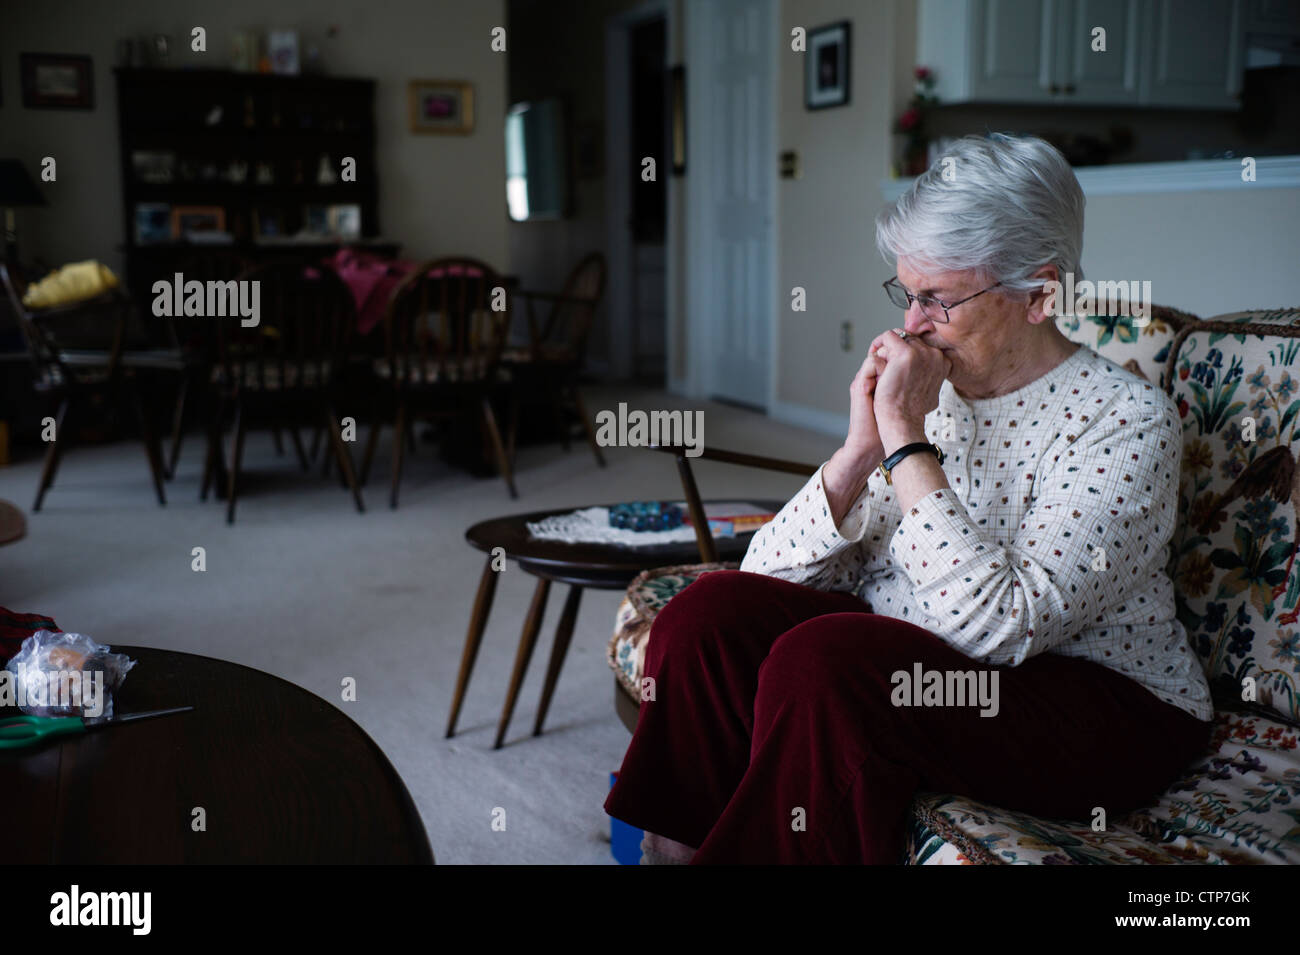 Old woman sitting in chair. Stock Photo